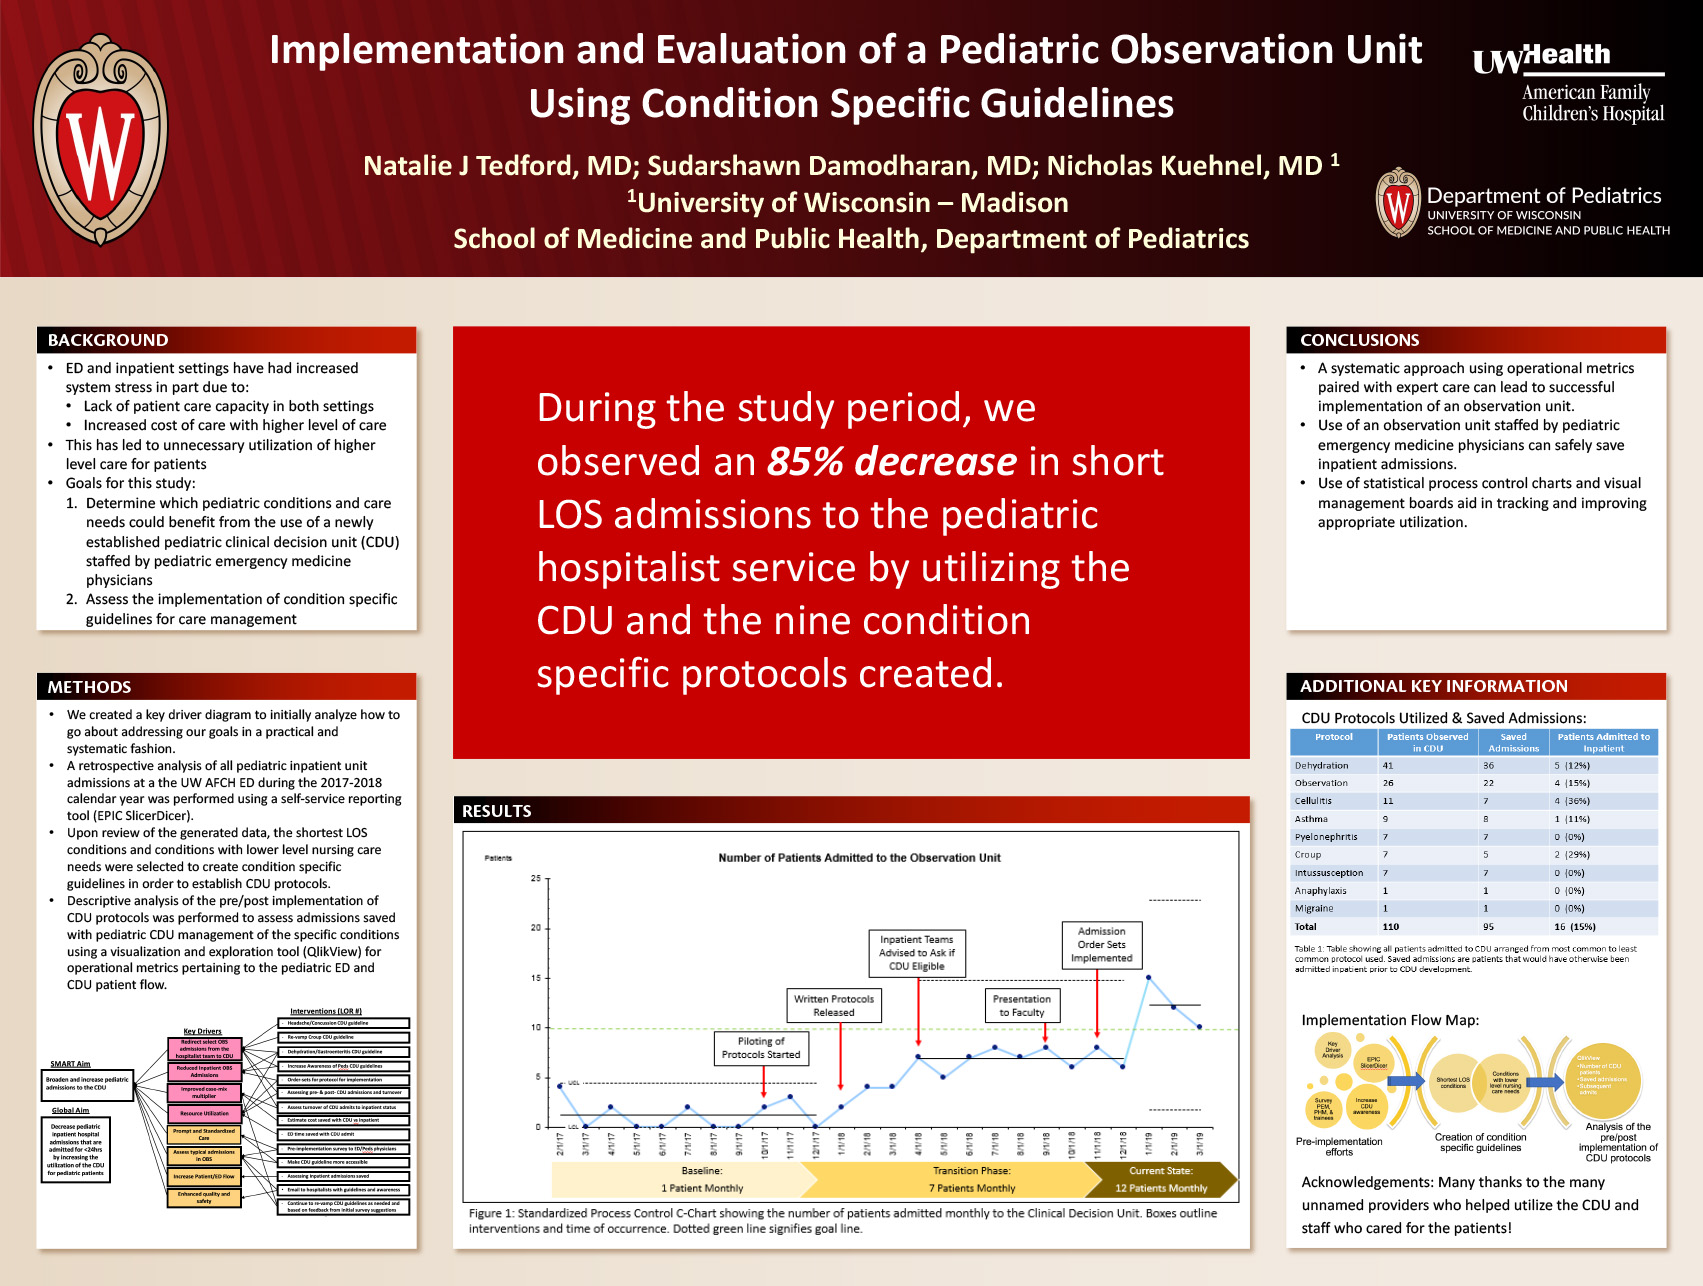 Implementation and Evaluation of a Pediatric Observation Unit Using Condition Specific Guidelines poster image